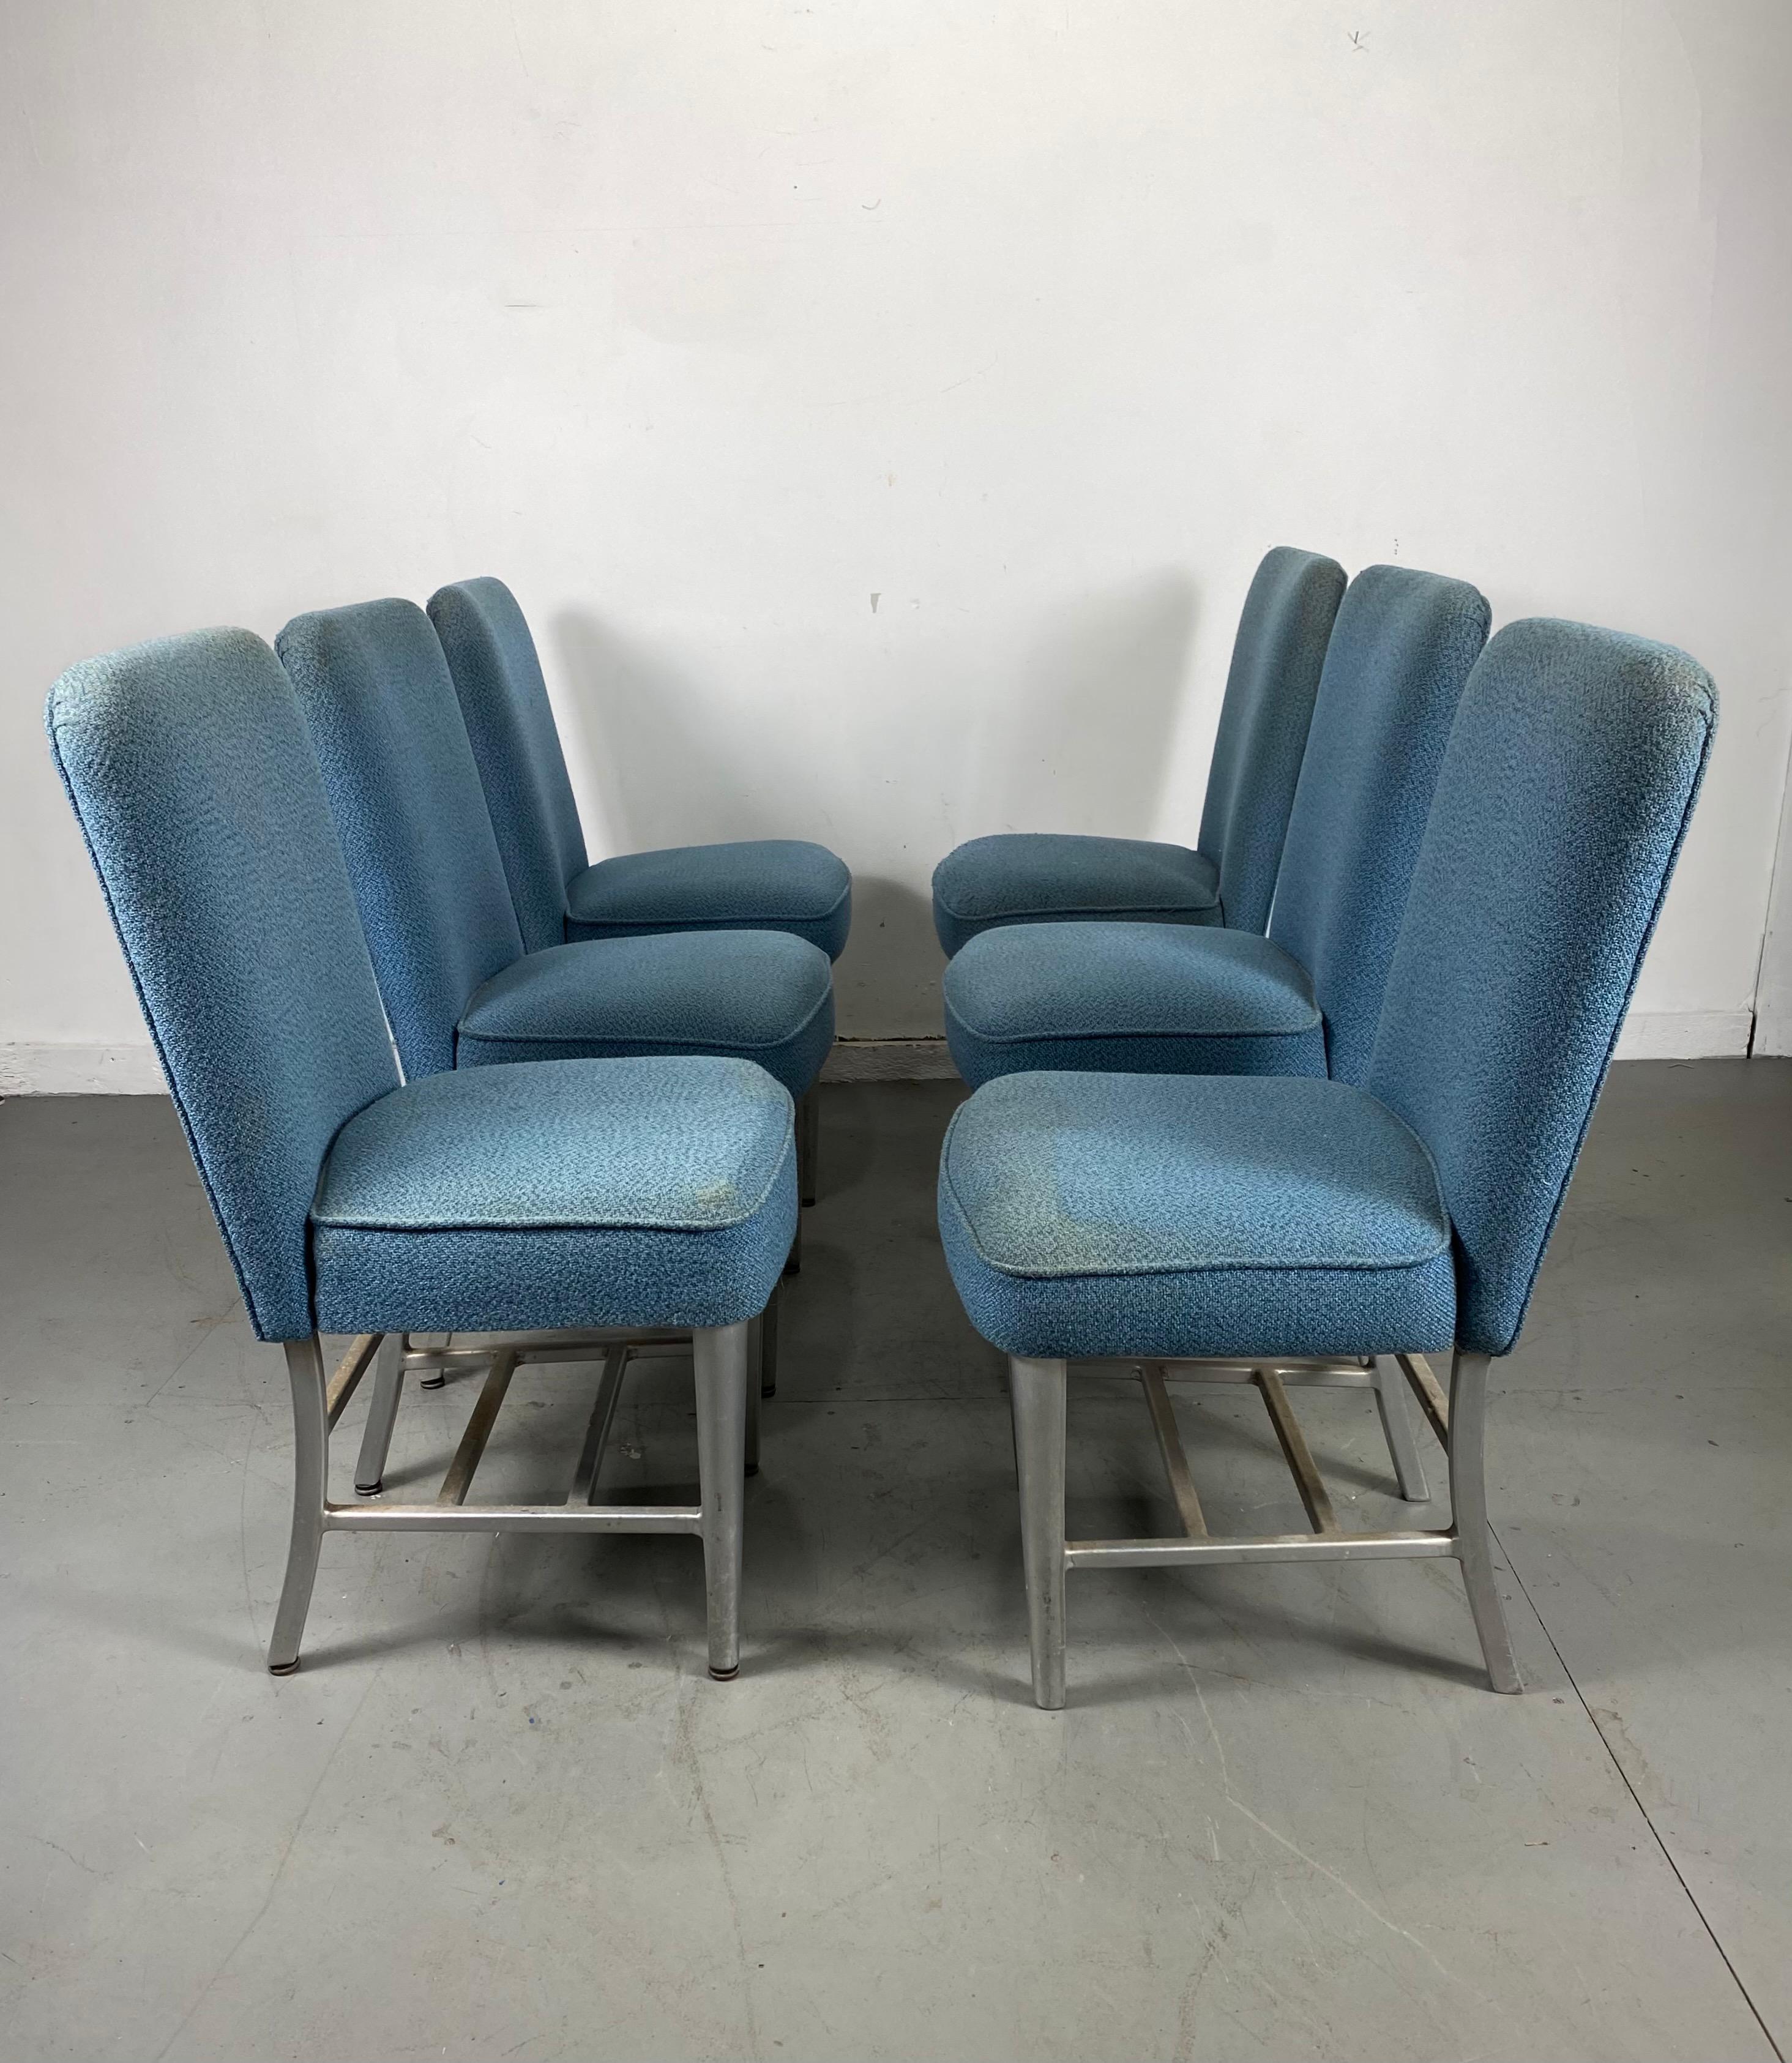 These Art Deco aluminum dining car chairs were salvaged from a Pullman passenger train remodeled in the 1960s. The chairs feature tubular aluminum frames and blue wool upholstery, fabric in need of cleaning.

Attributed to Emeco.